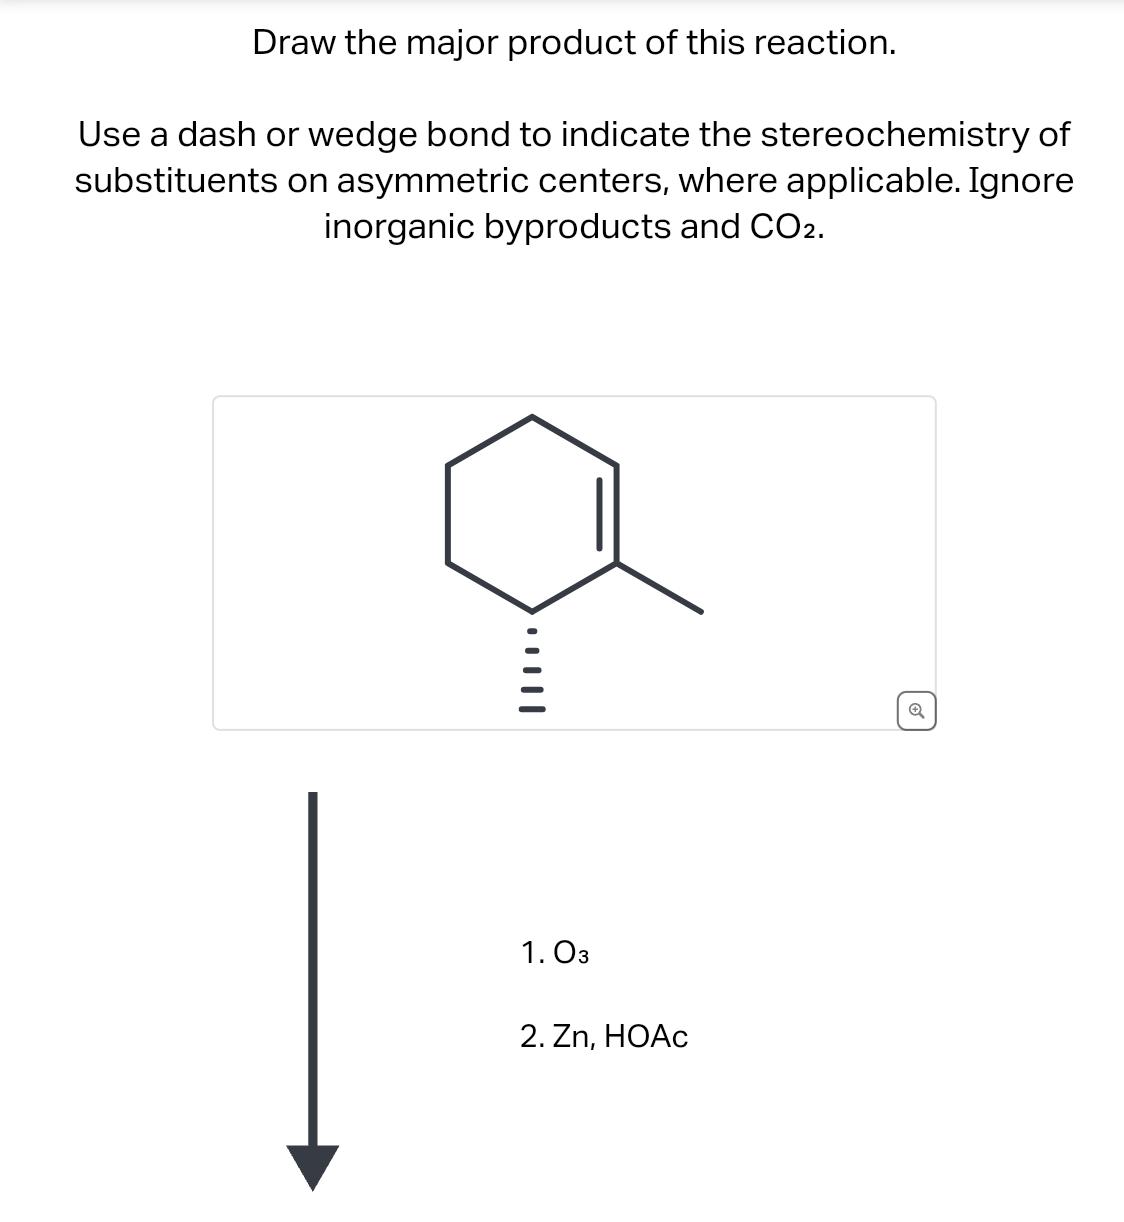 Draw the major product of this reaction.
Use a dash or wedge bond to indicate the stereochemistry of
substituents on asymmetric centers, where applicable. Ignore
inorganic byproducts and CO2.
› · ·|||
1.03
2. Zn, HOAc
✔